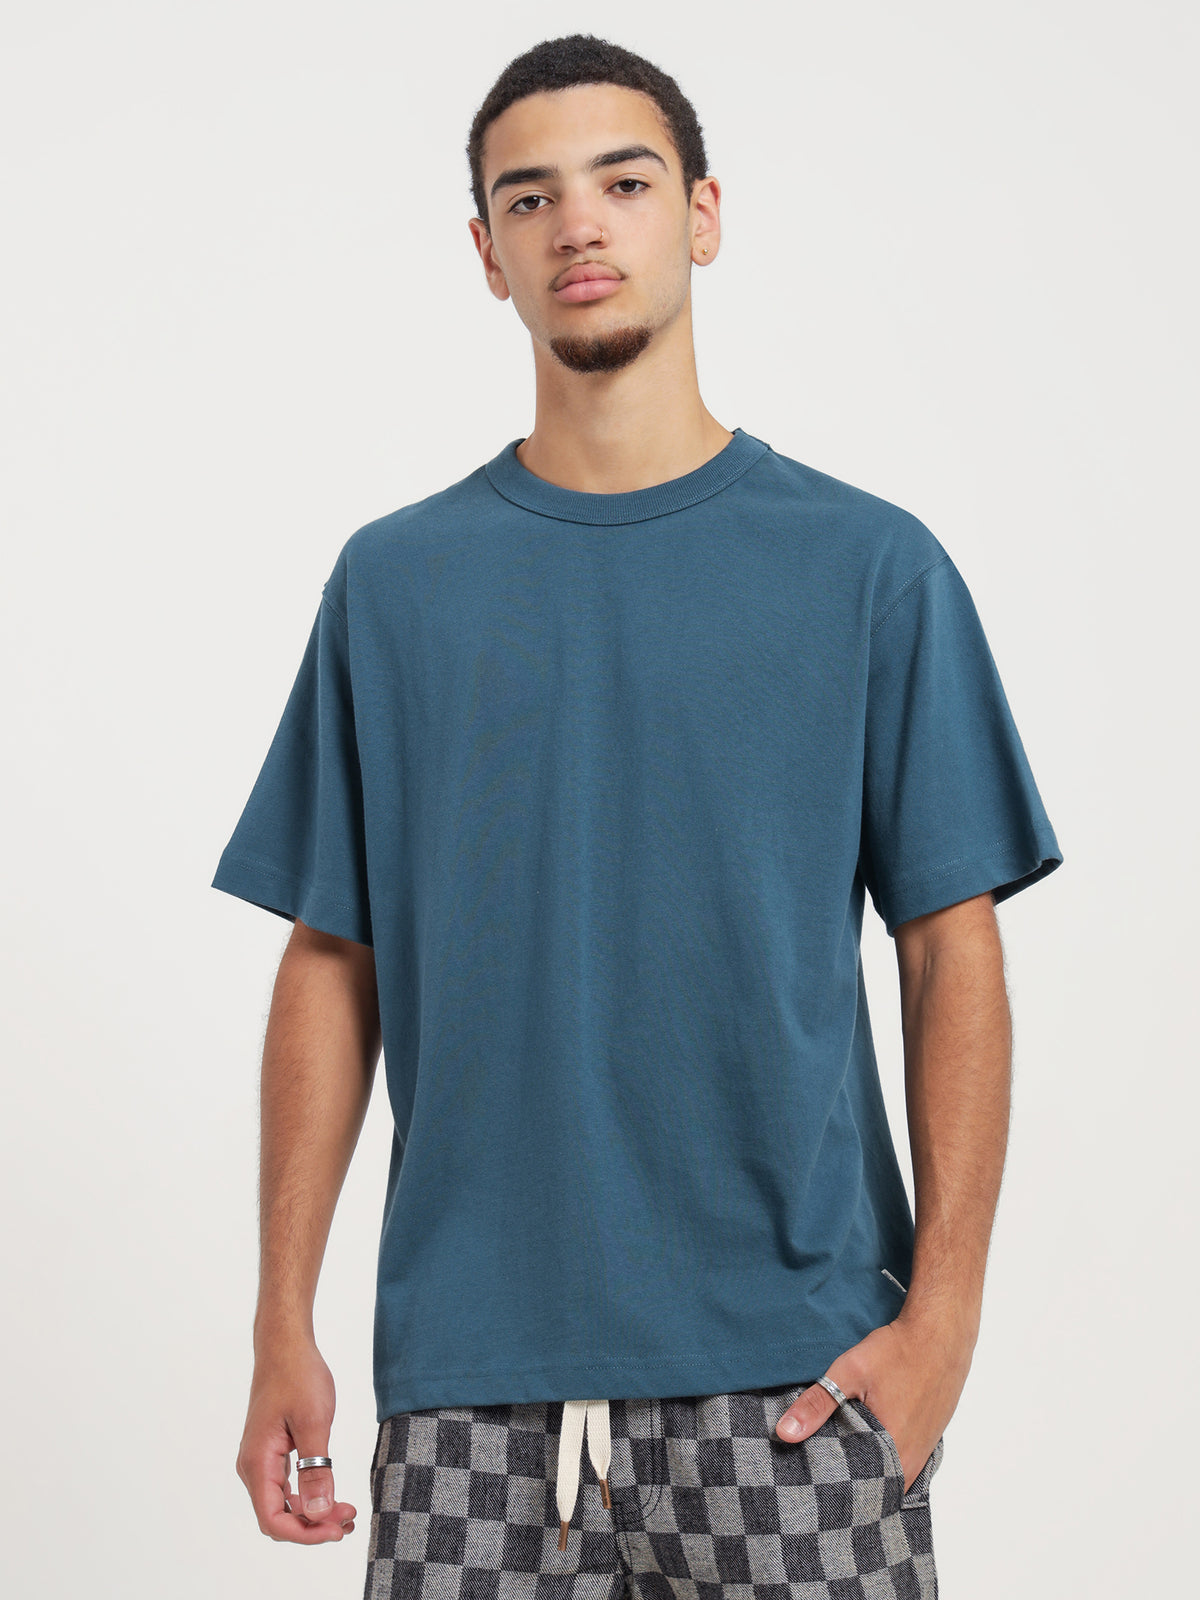 Heavyweight Crew T-Shirt in Pacific Blue